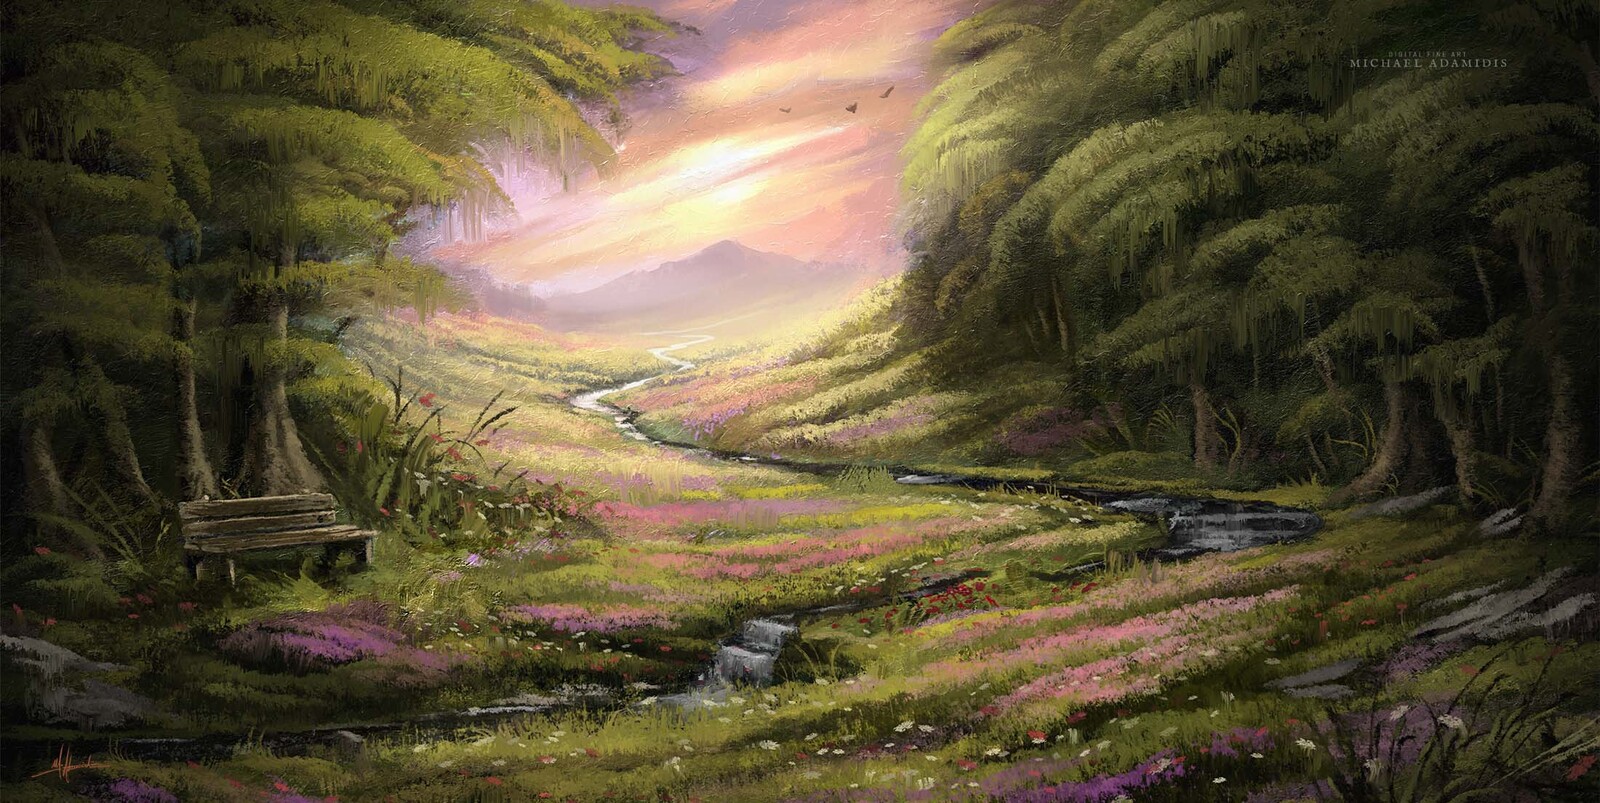 Digital Landscape Painting - Garden of the Forest